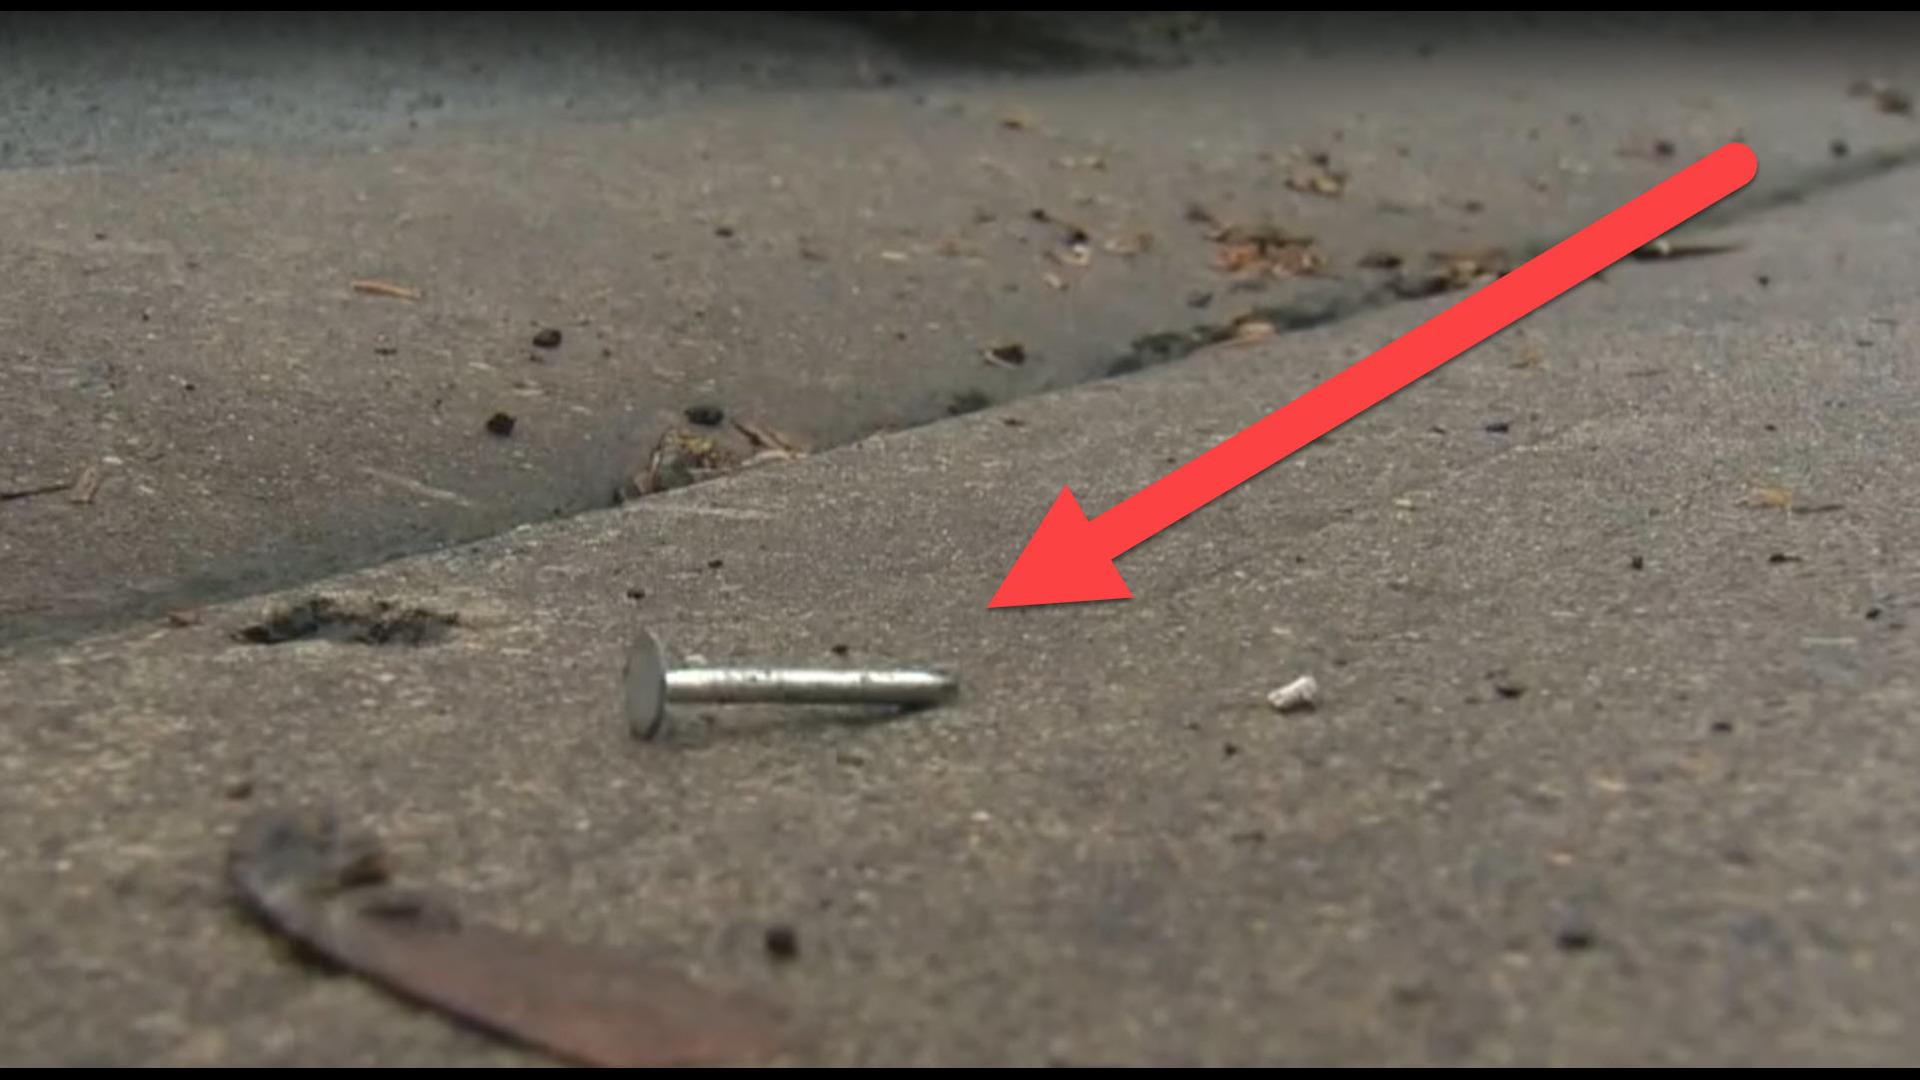 Police are offering a $1,000 reward for information that leads to the discovery of the person throwing nails in the road in Oregon City.